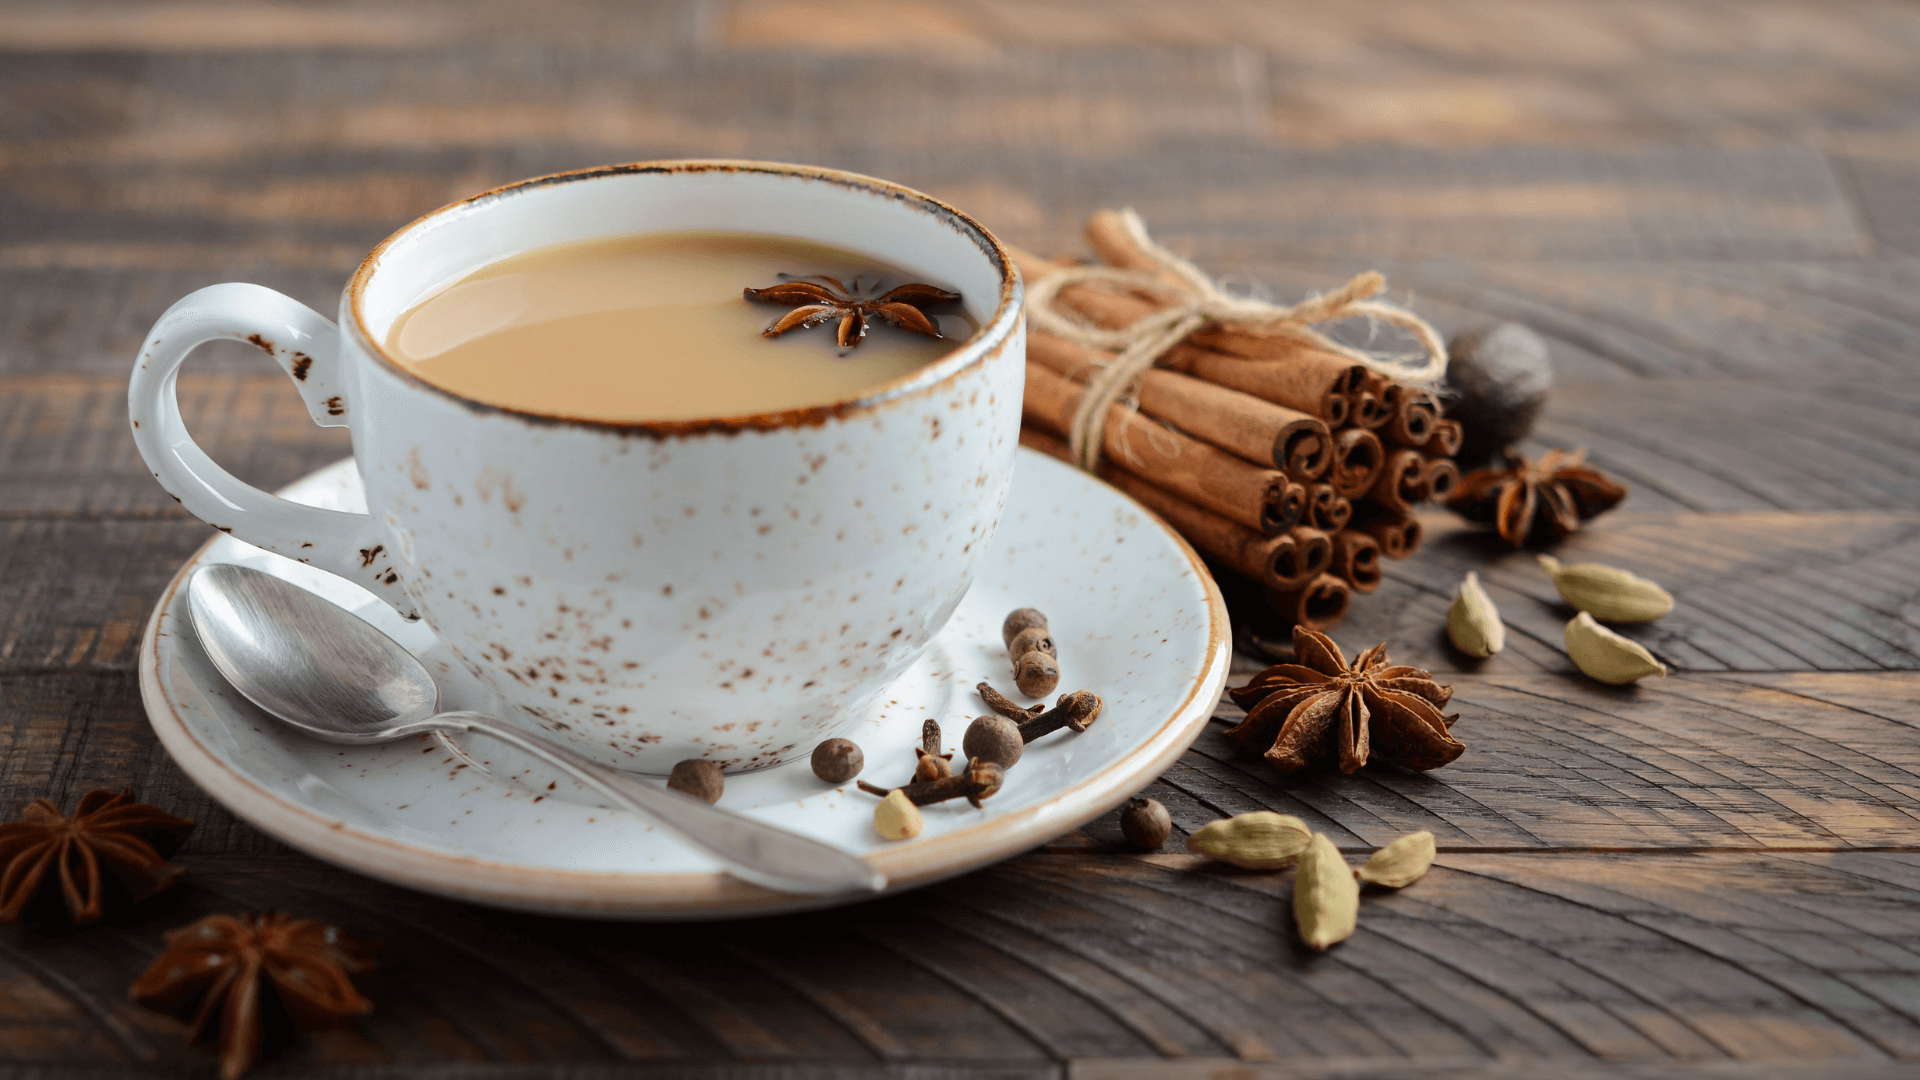 Cardamom Tea Time: A Collection of Soothing and Aromatic Tea Recipes